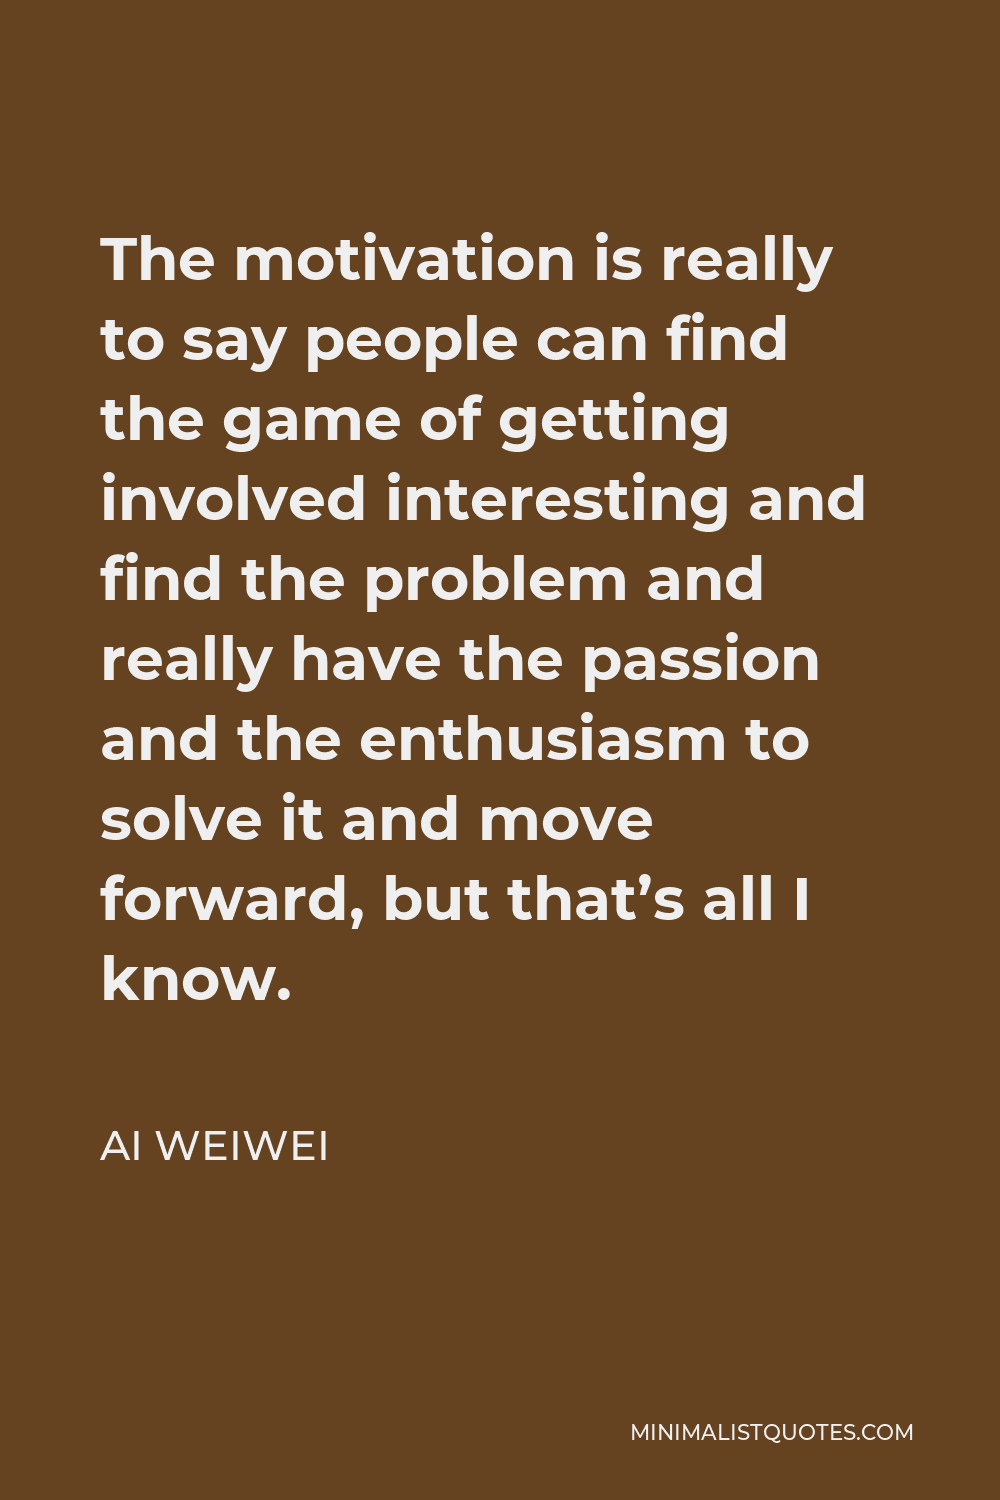 Ai Weiwei Quote - The motivation is really to say people can find the game of getting involved interesting and find the problem and really have the passion and the enthusiasm to solve it and move forward, but that’s all I know.